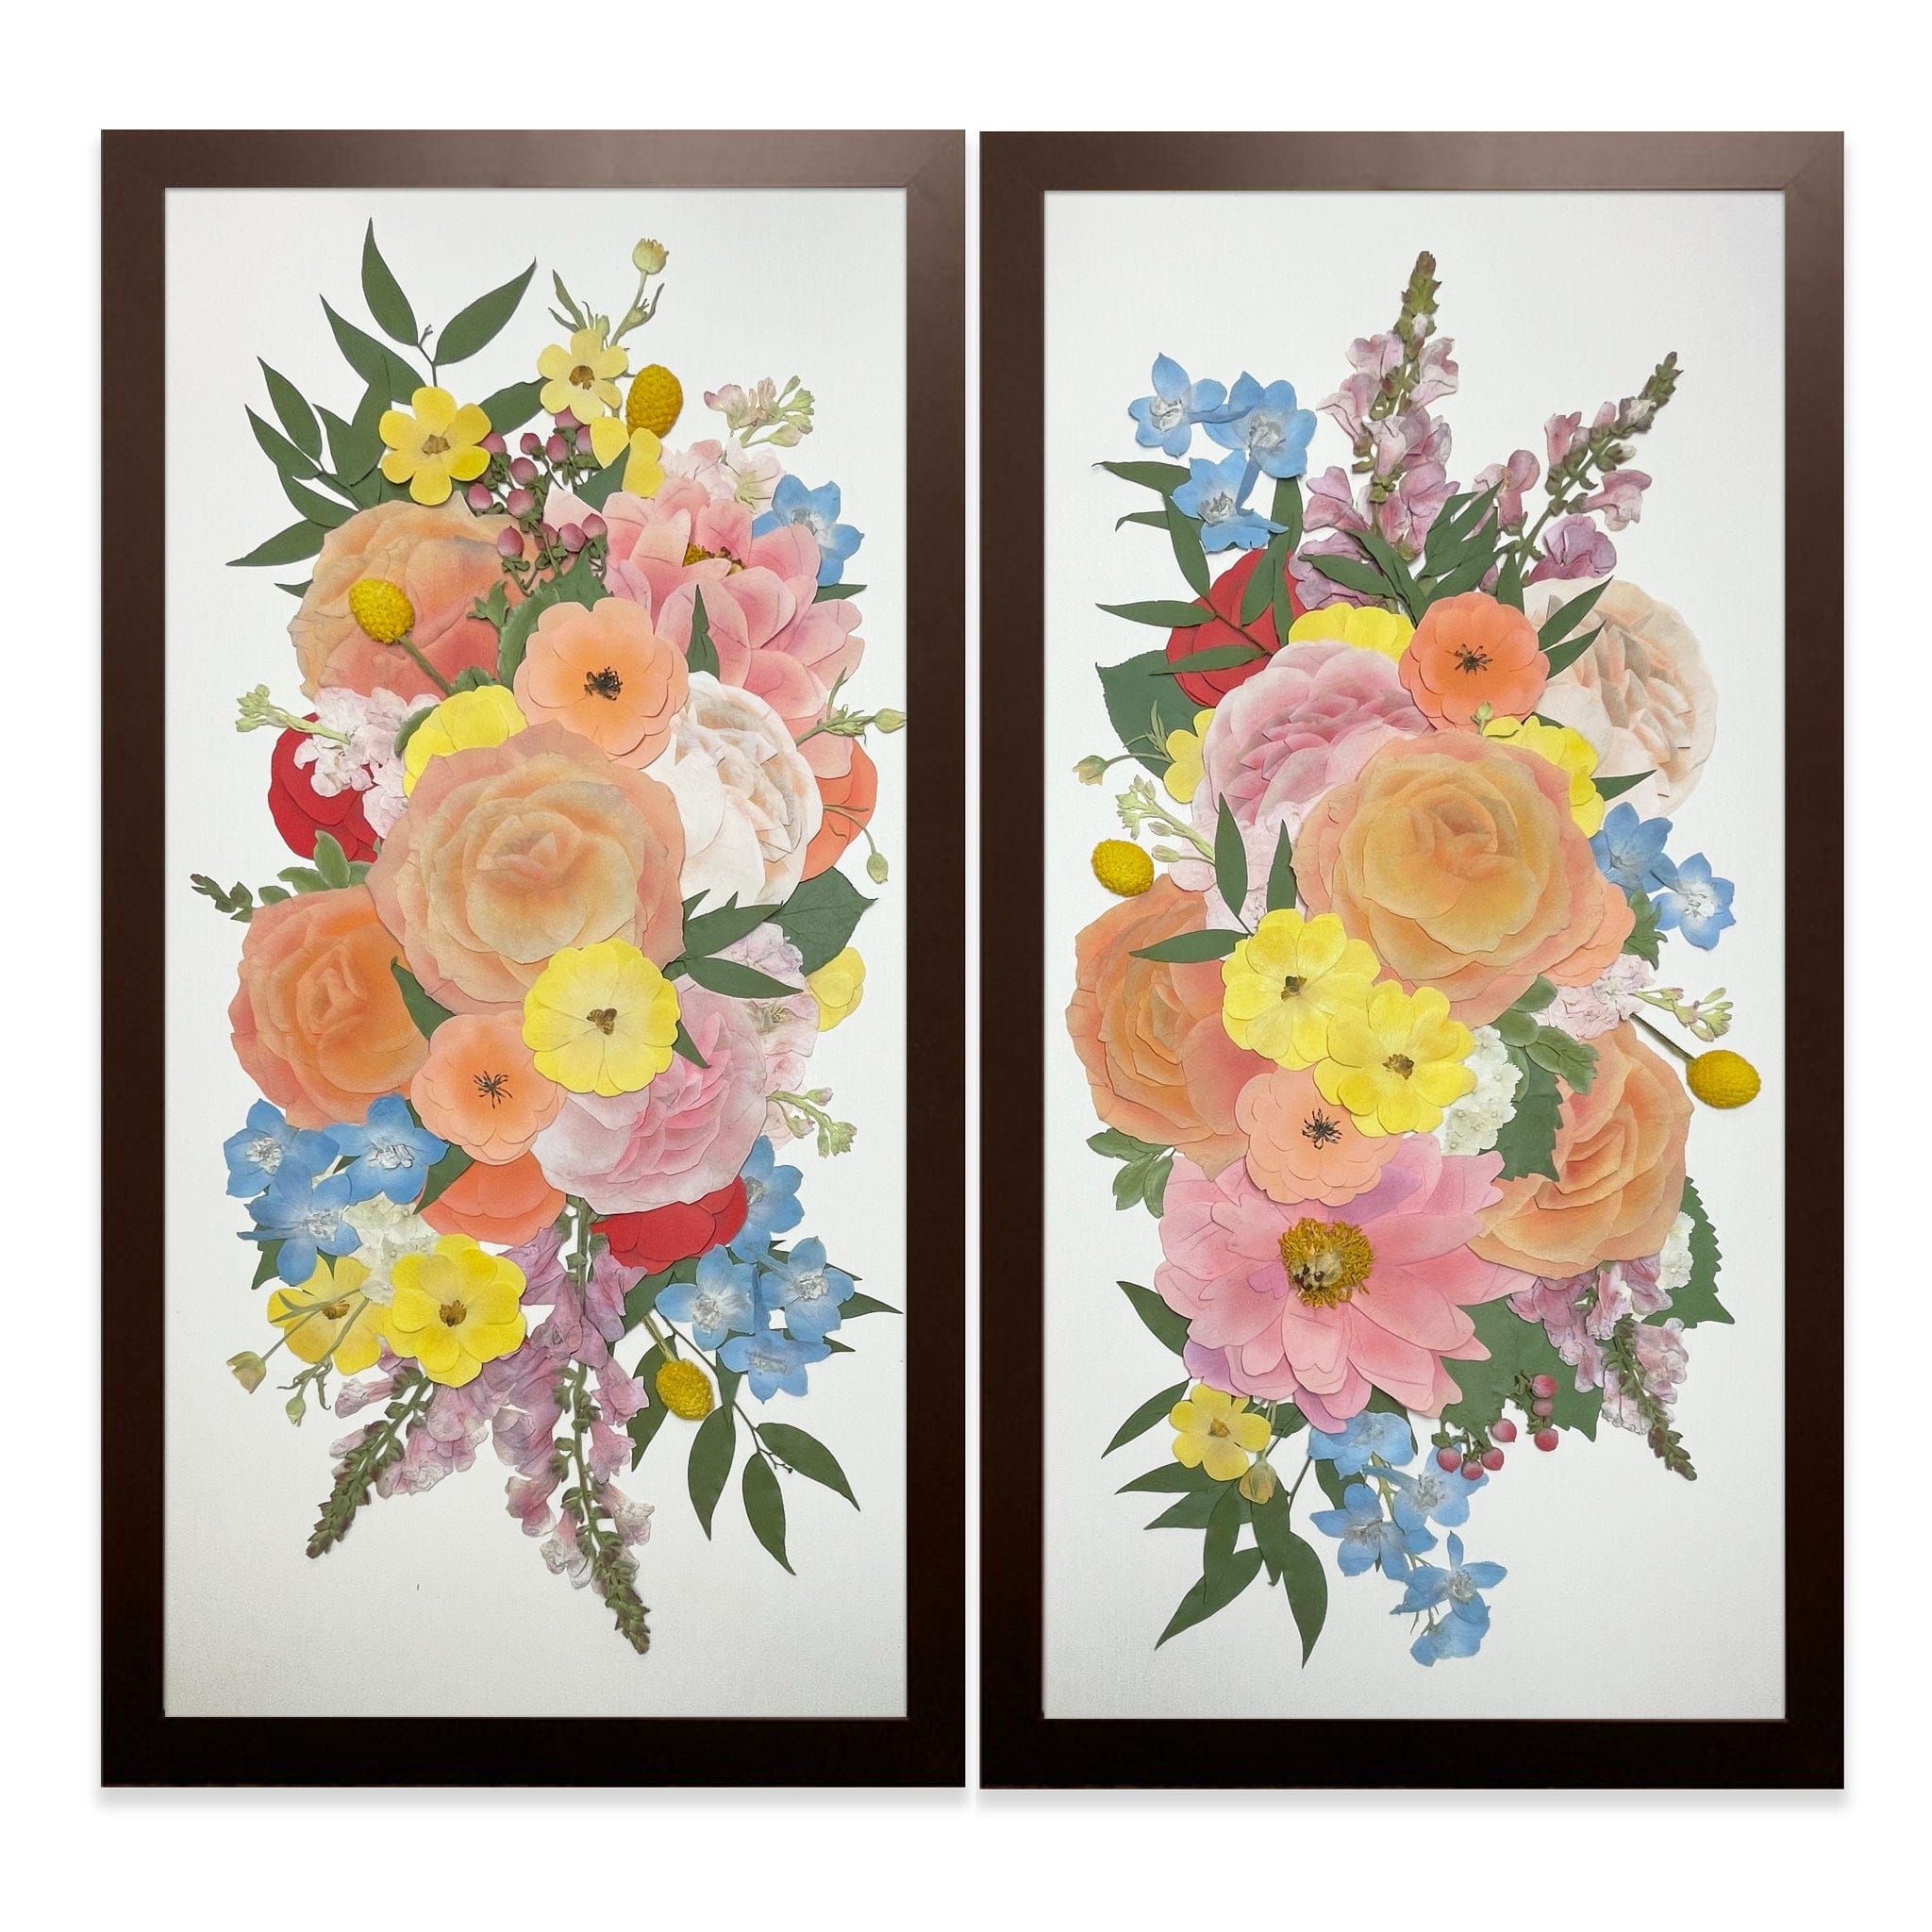 Designs by Andrea Pressed (Framed) 12" x 24" / Rectangle / Panel 12" x 24" Duo Panels Classic Frames